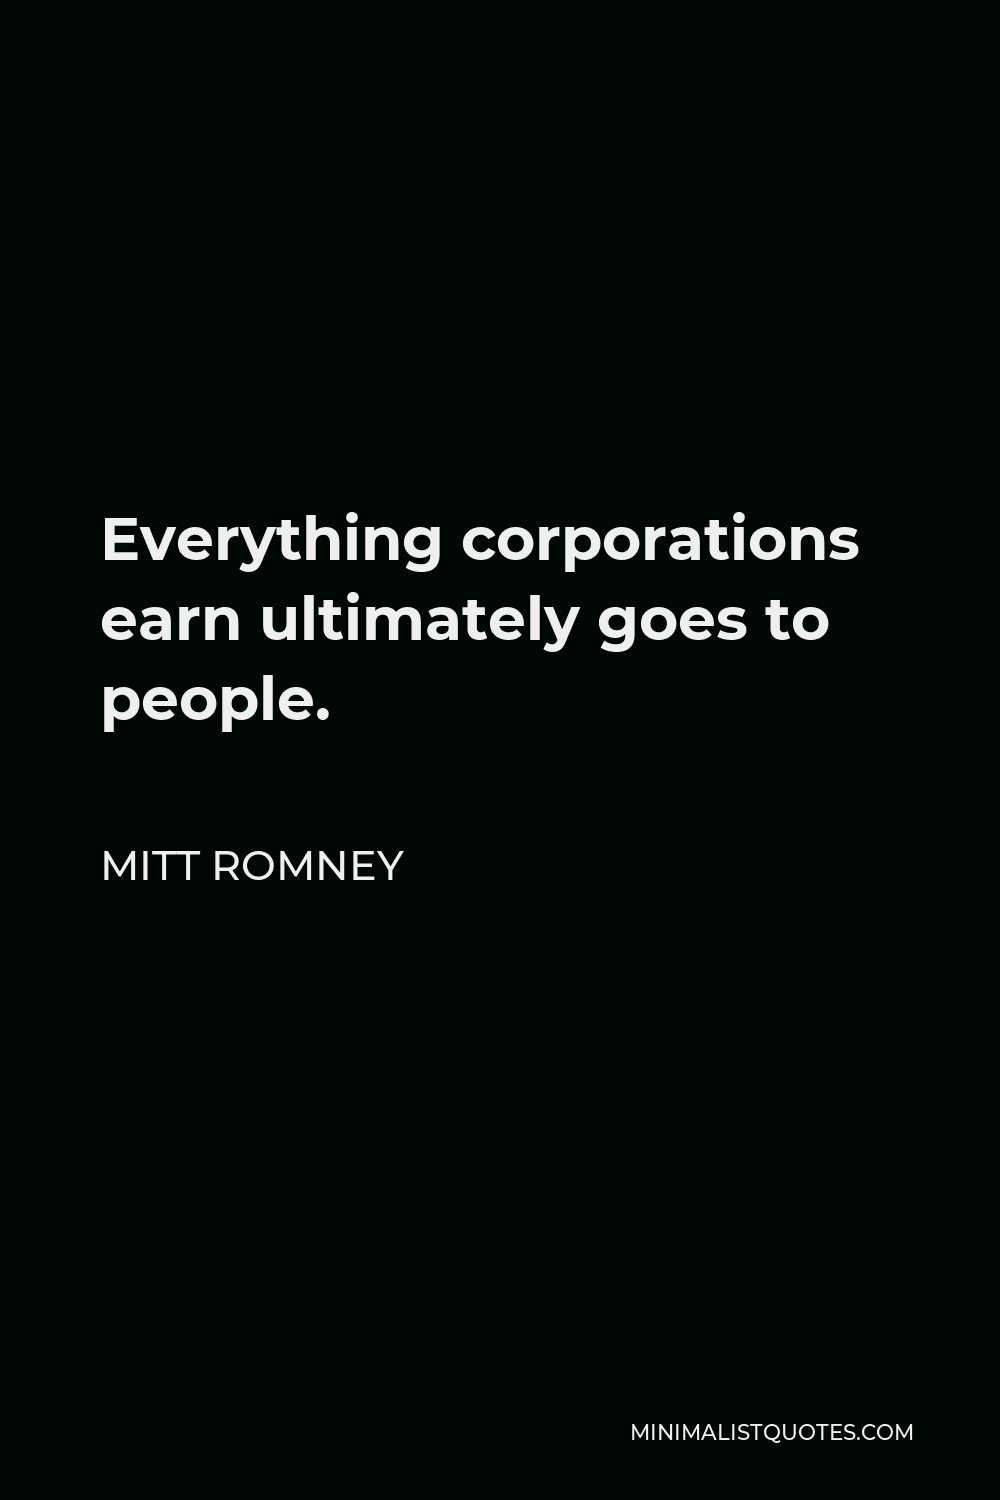 Mitt Romney Quote - Everything corporations earn ultimately goes to people.